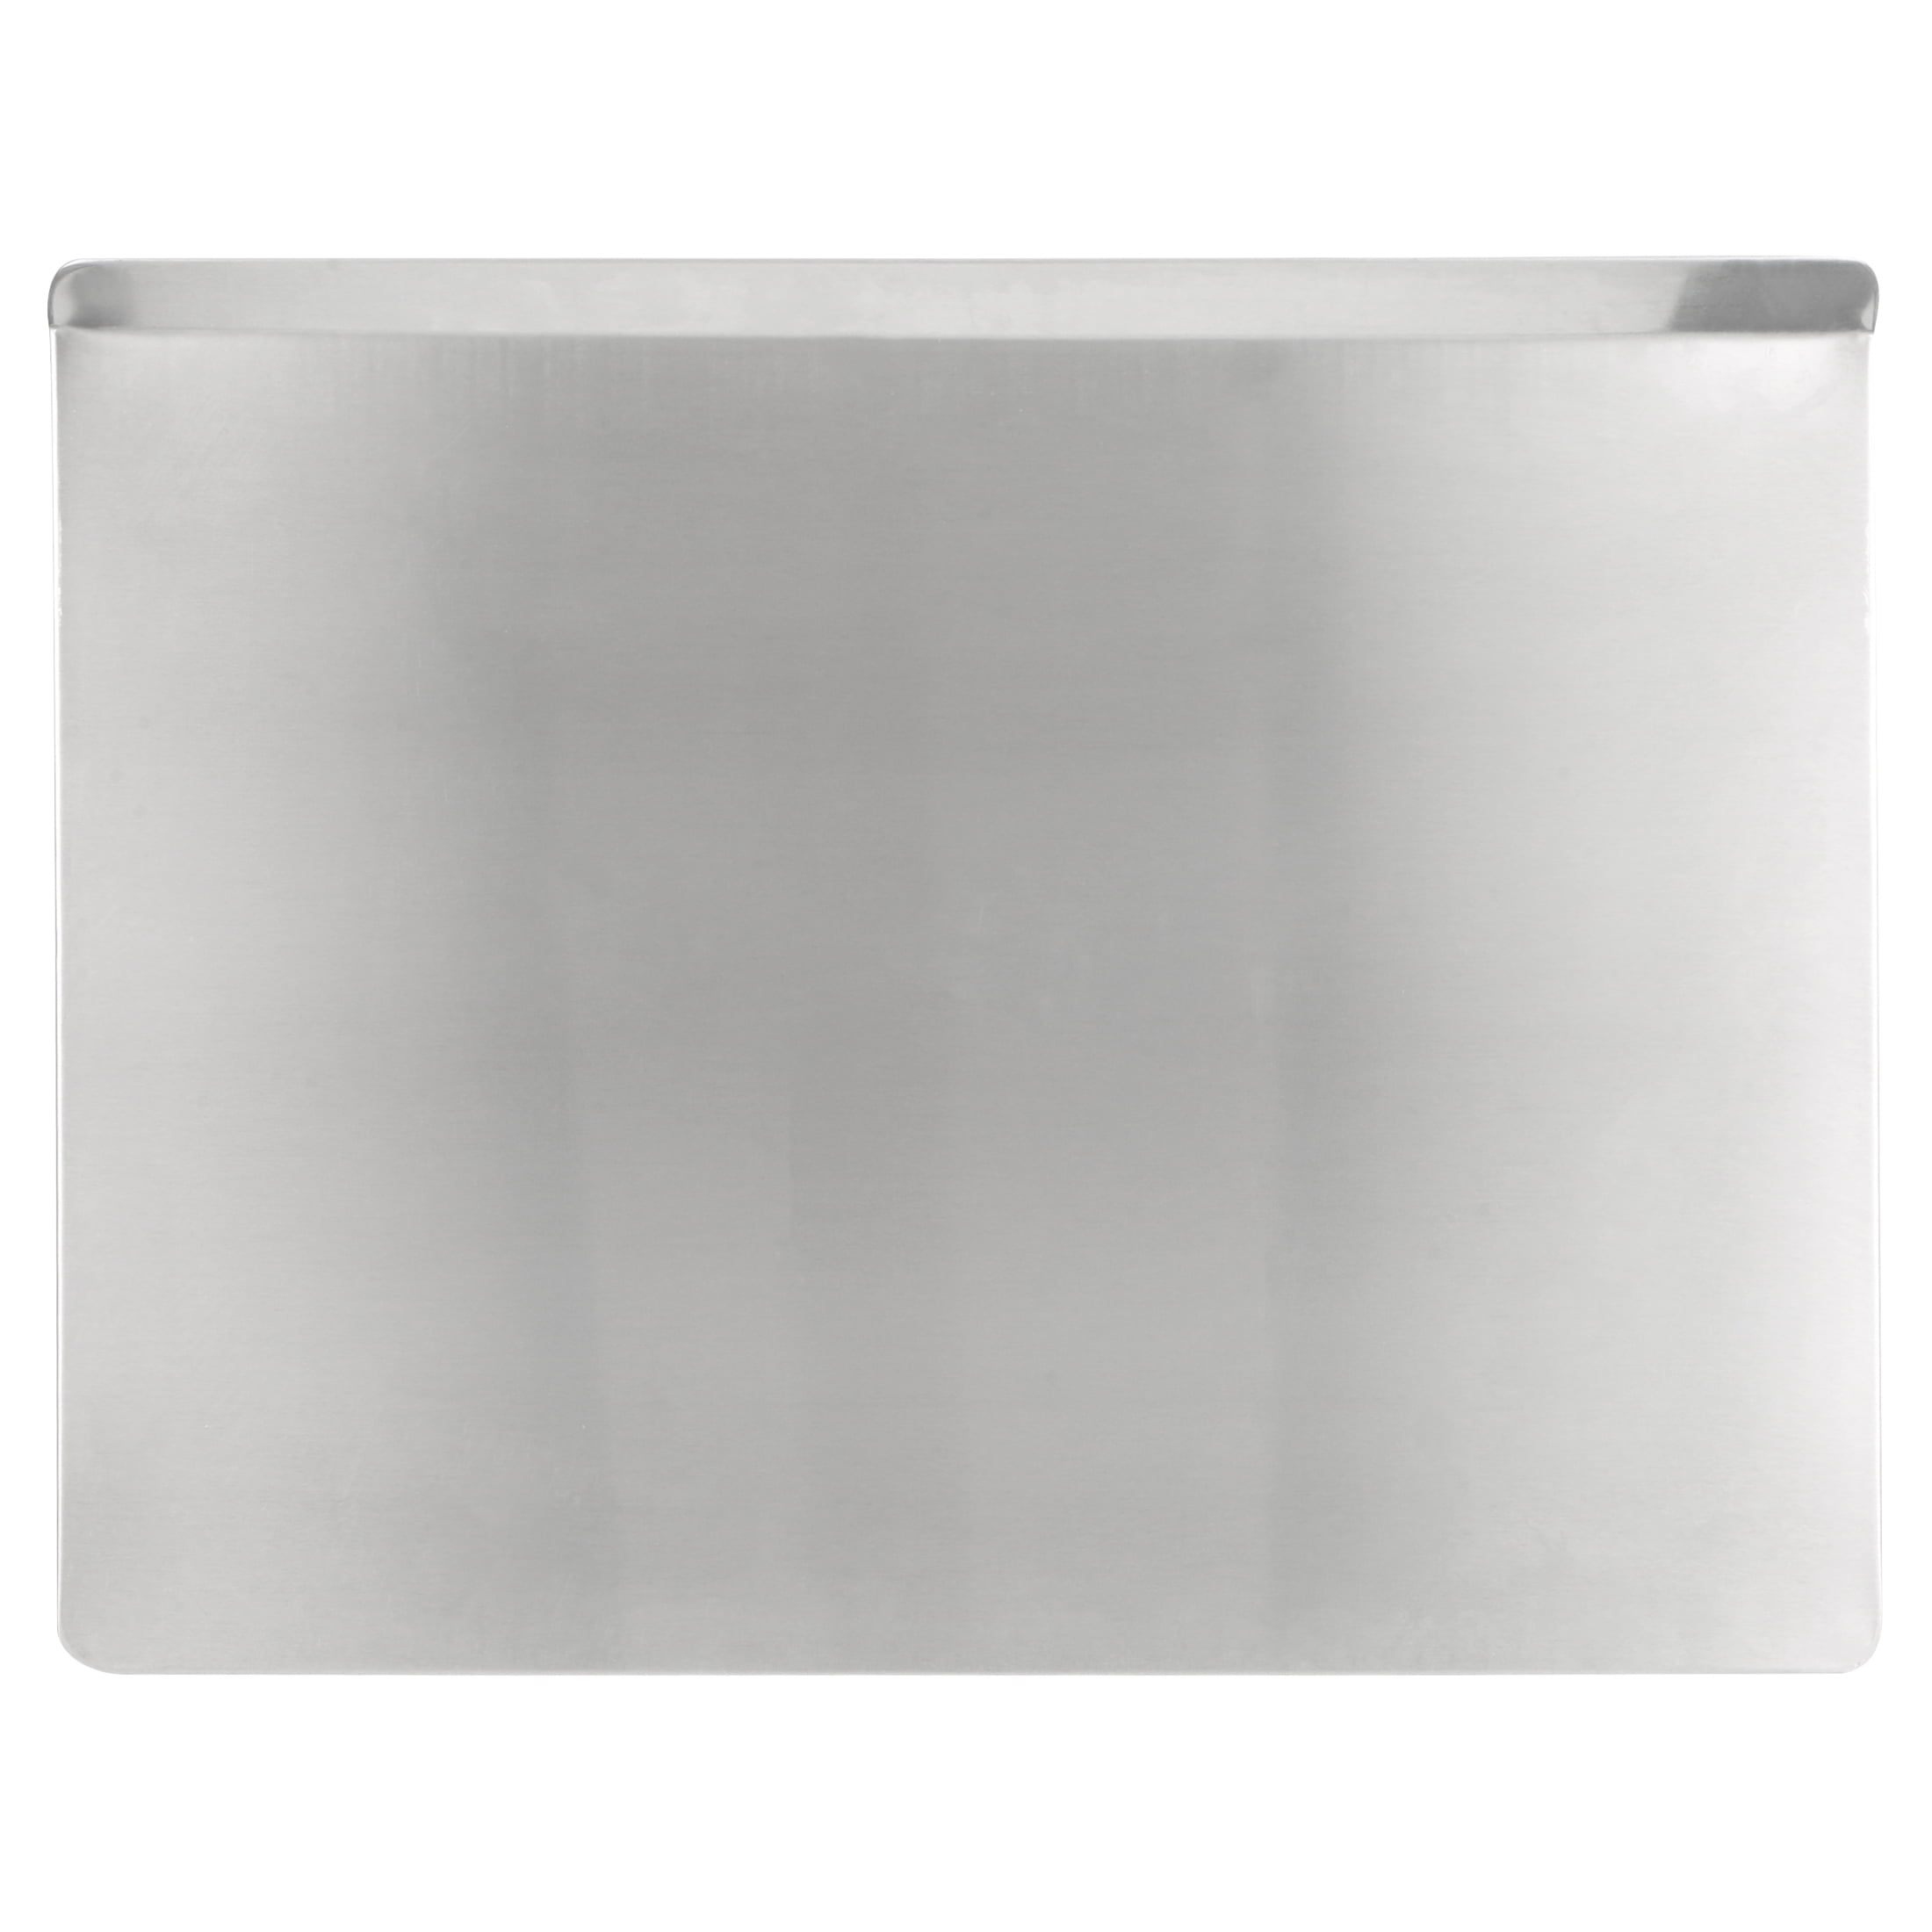 AirBake Ultra Mega Insulated Aluminum Cookie Sheet, 20 x 15.5 in - Foods Co.